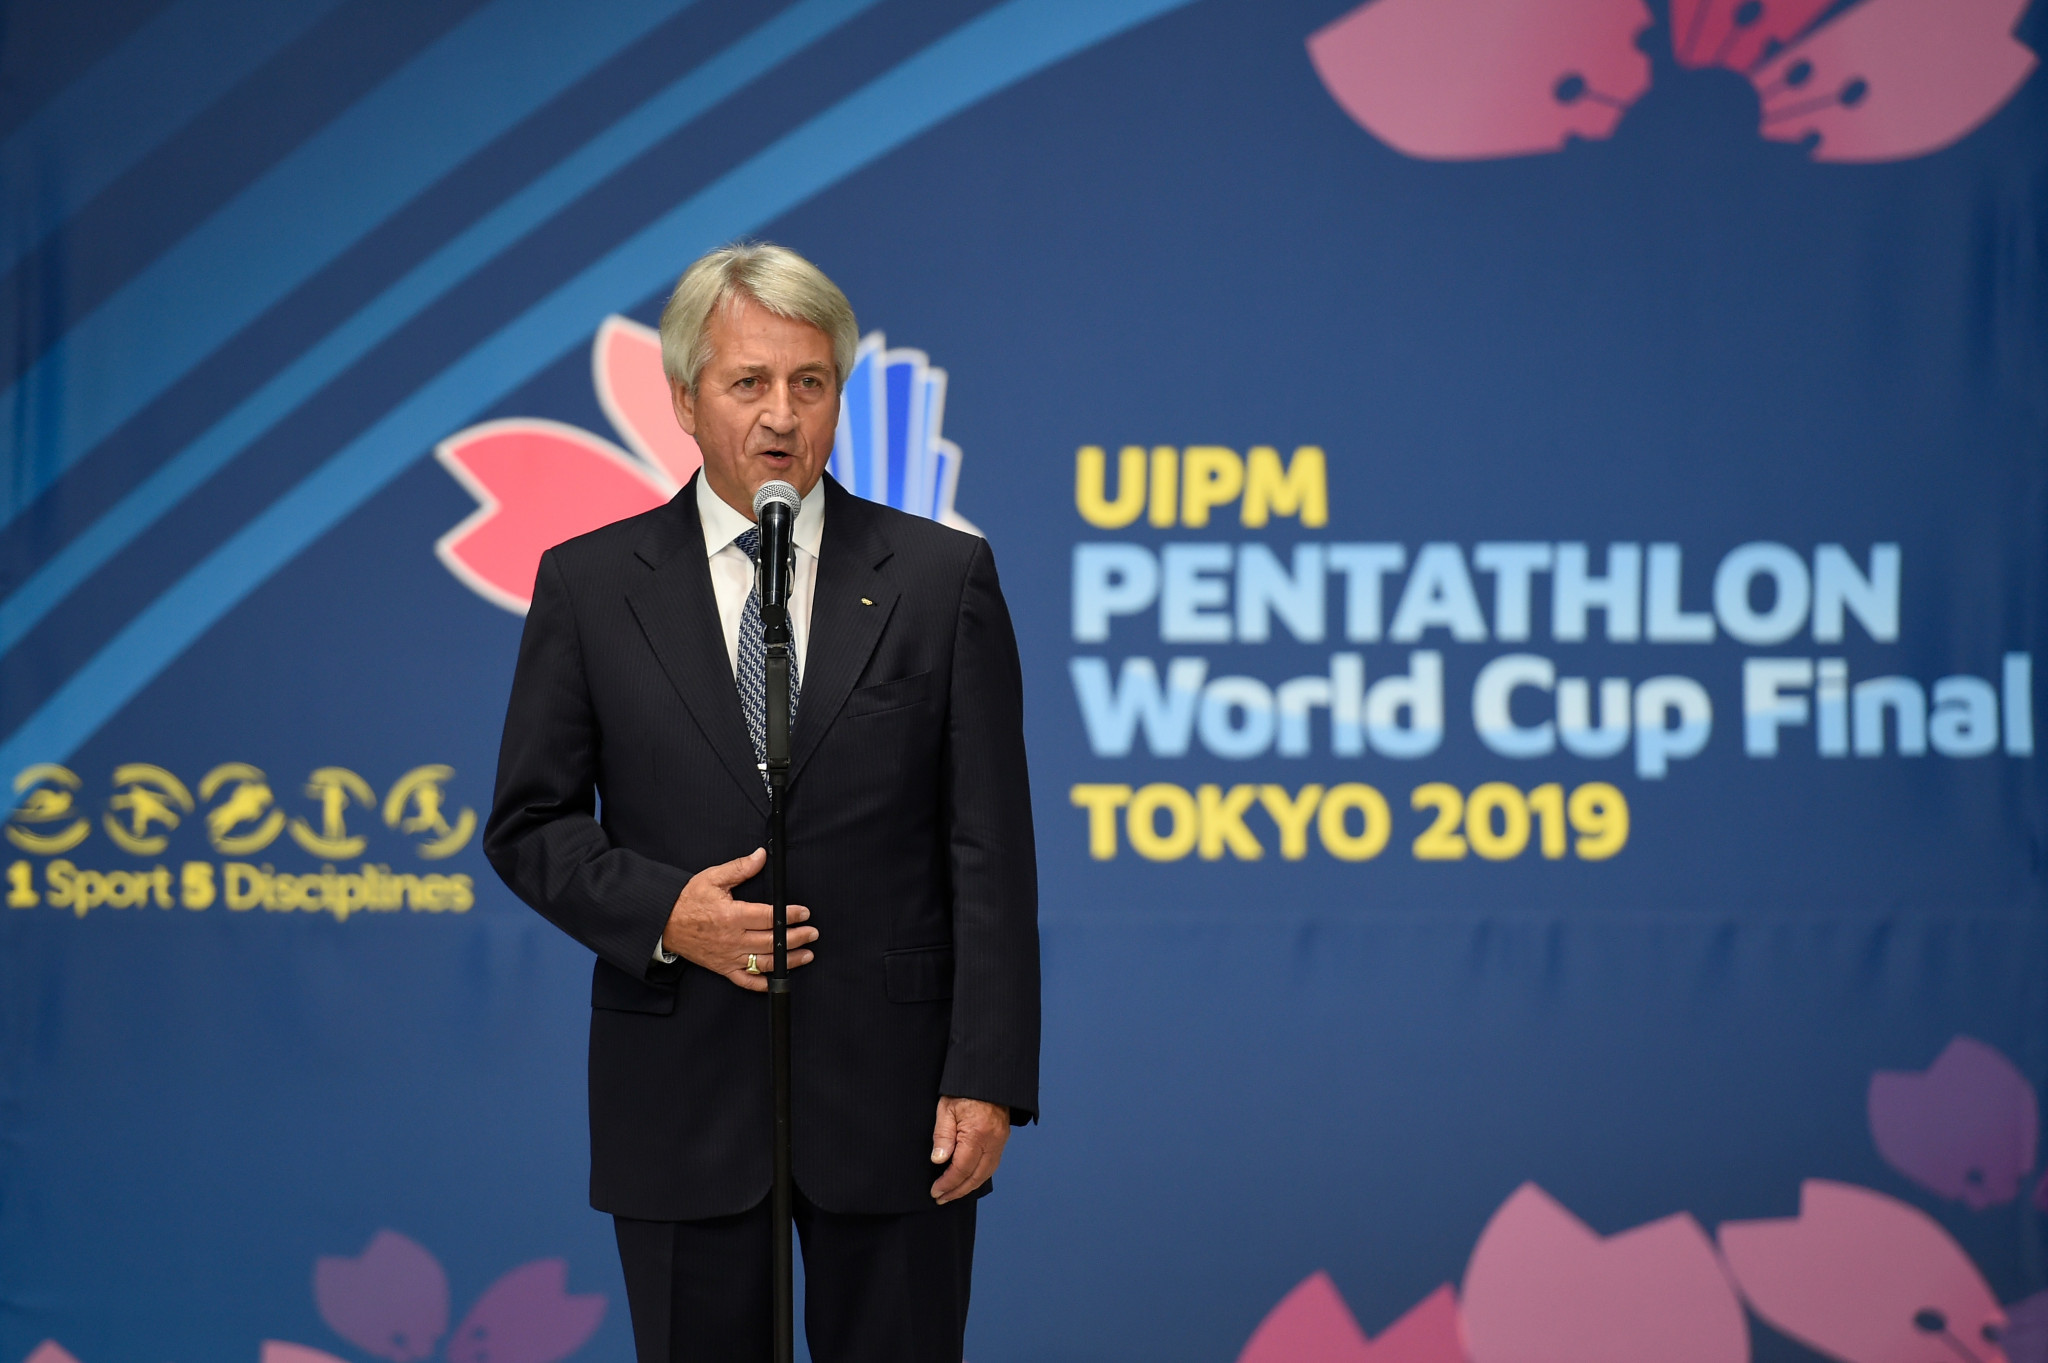 Modern pentathletes unite to challenge UIPM on riding decision before Executive Board call